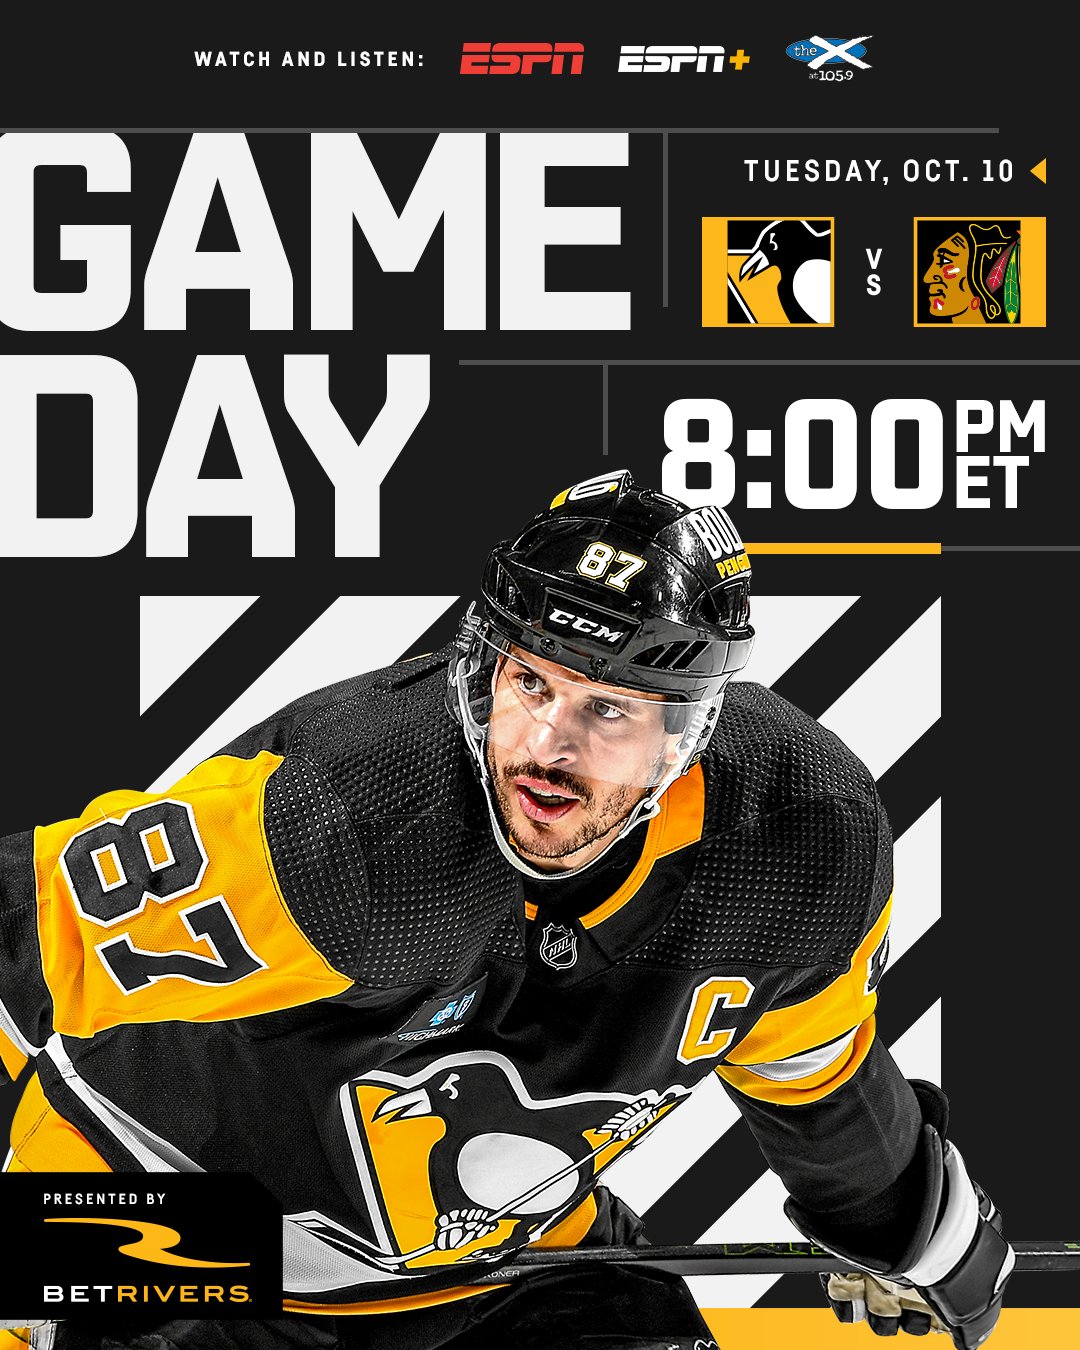 It's a hockey night in Pittsburgh - Pittsburgh Penguins